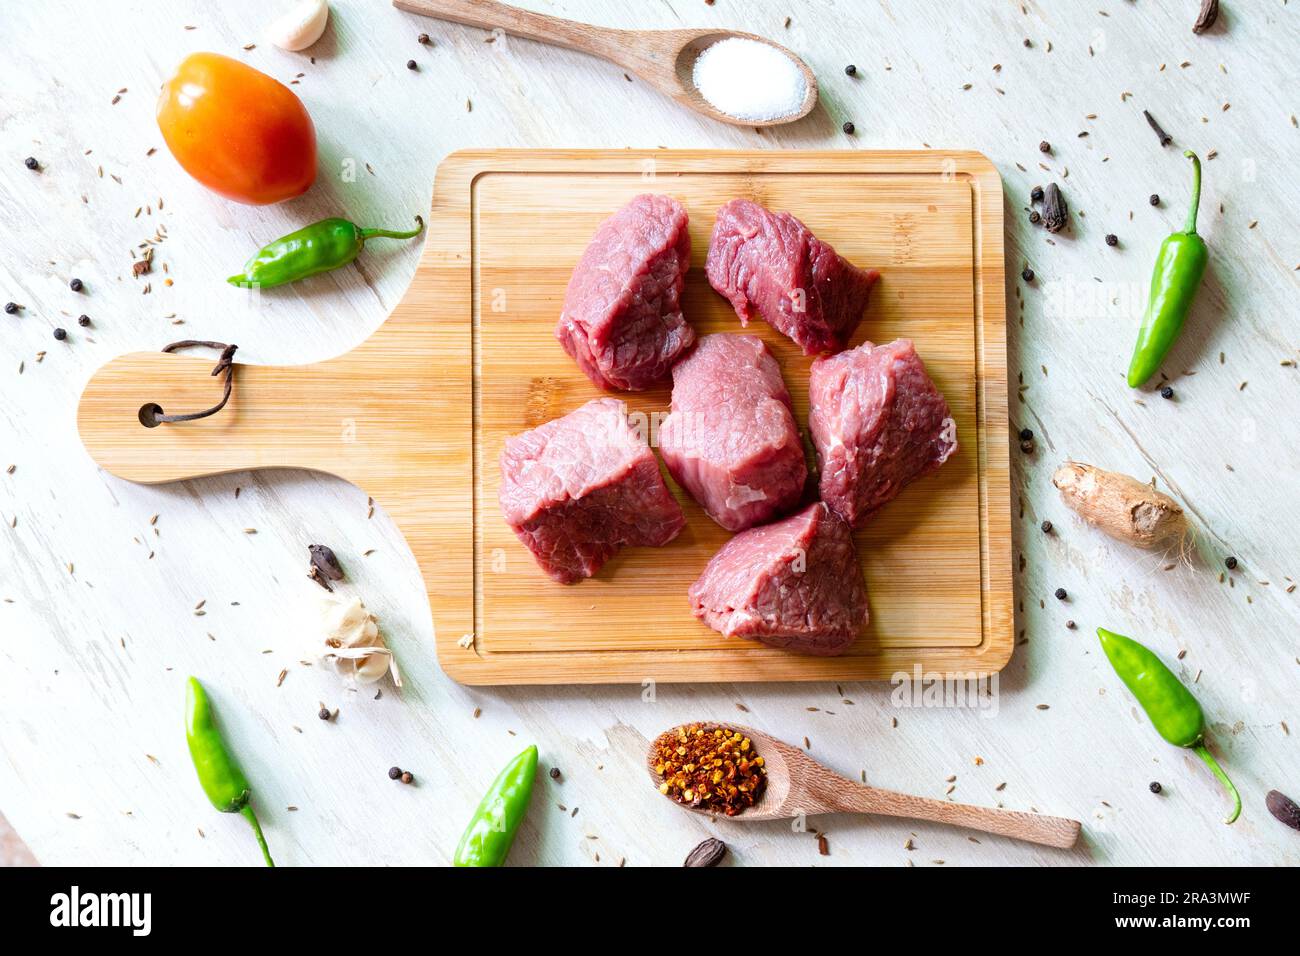 https://c8.alamy.com/comp/2RA3MWF/raw-beef-meat-on-wooden-cutting-board-for-cooking-stew-or-other-meat-dish-on-white-background-top-view-2RA3MWF.jpg